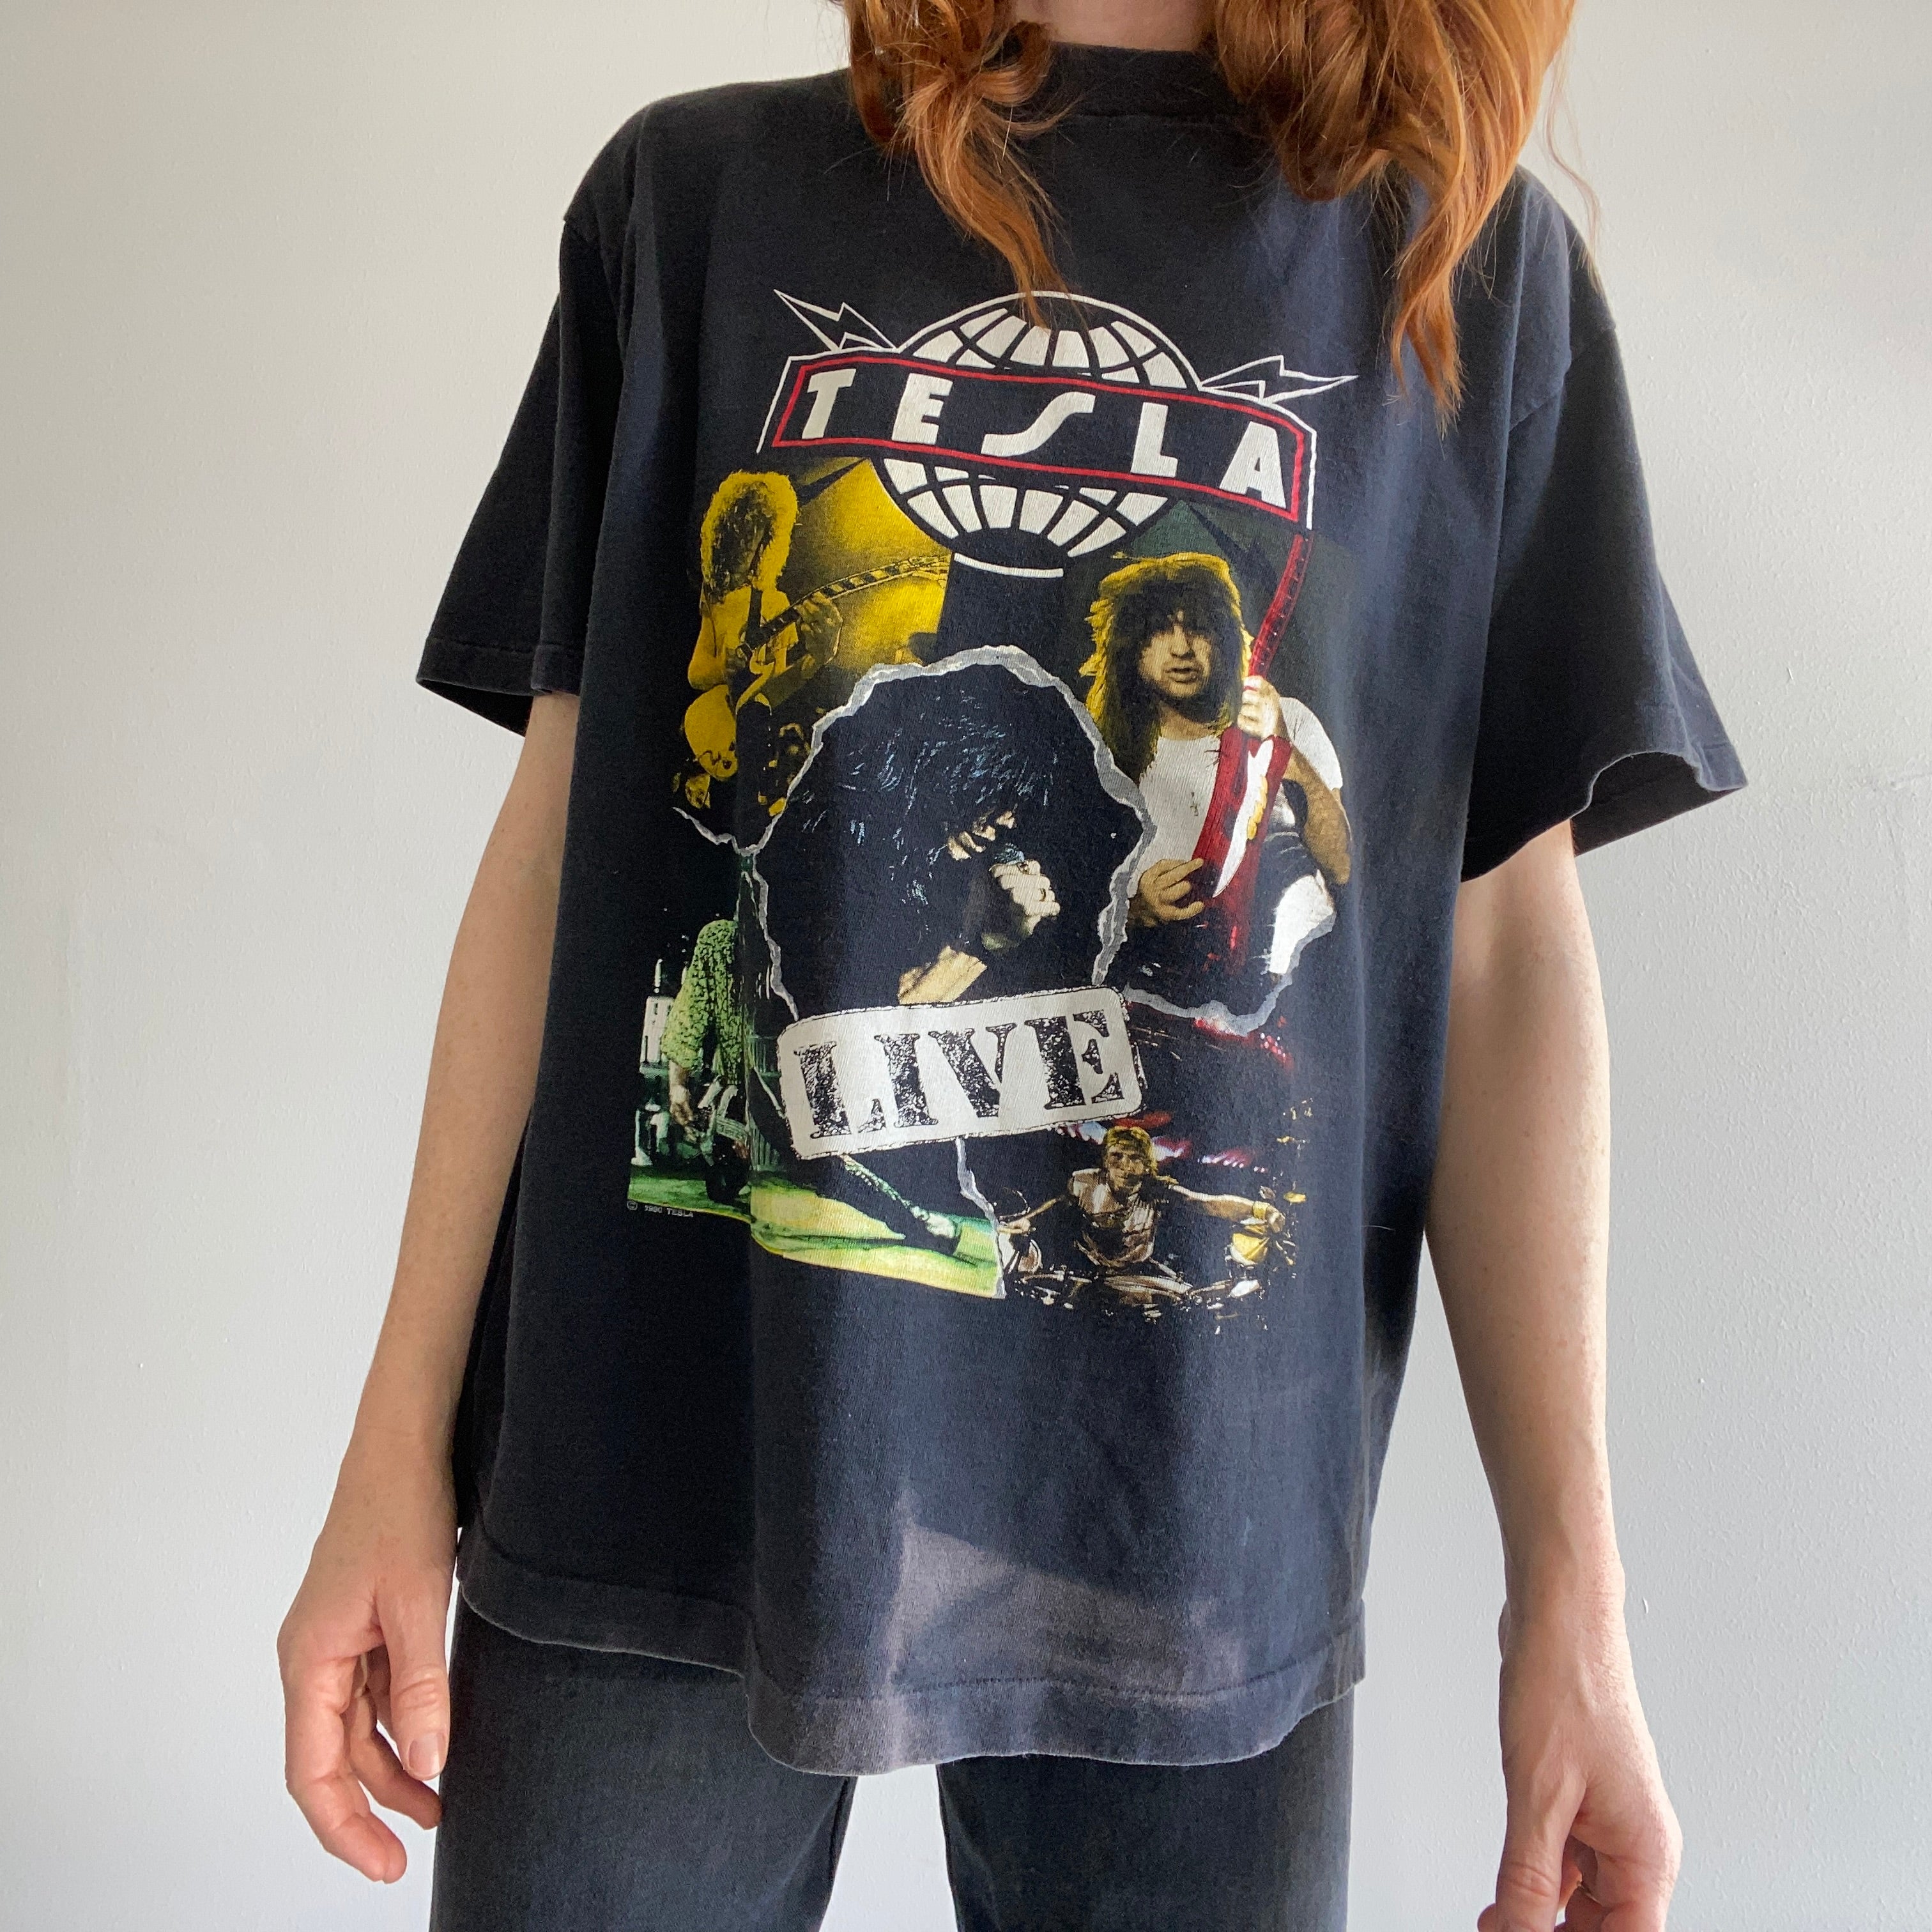 1992 Tesla (the Band) Tour T-Shirt with Bleach Fading - Giant by Tee J –  Red Vintage Co